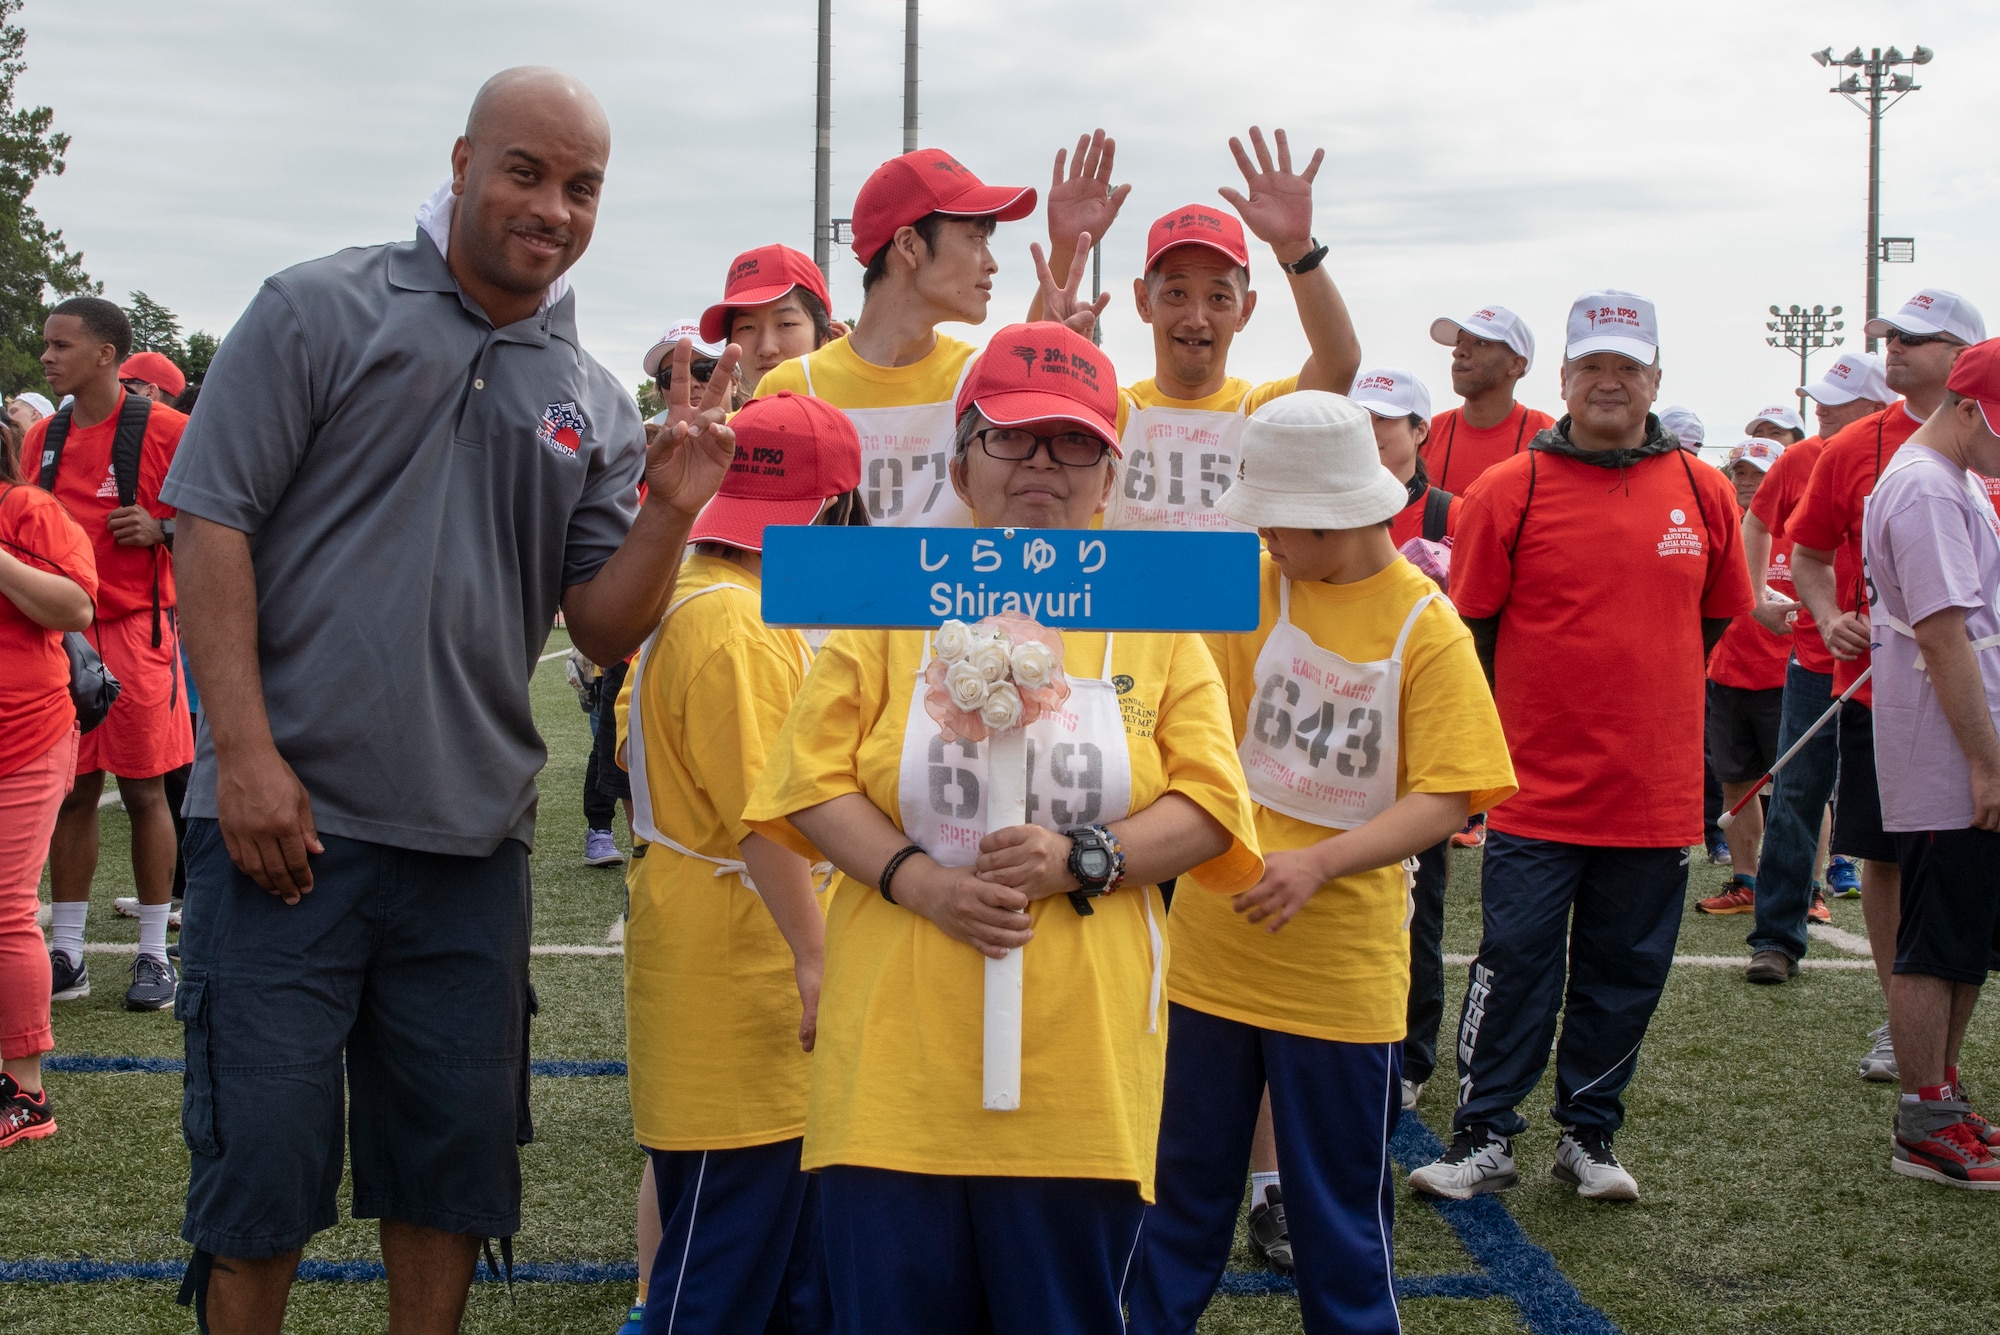 The athletes and coaches from Shirayuri pose for a photo immediately following the parade portion of the Kanto Plains Special Olympics at Yokota Air Base, Japan, May 19, 2018.